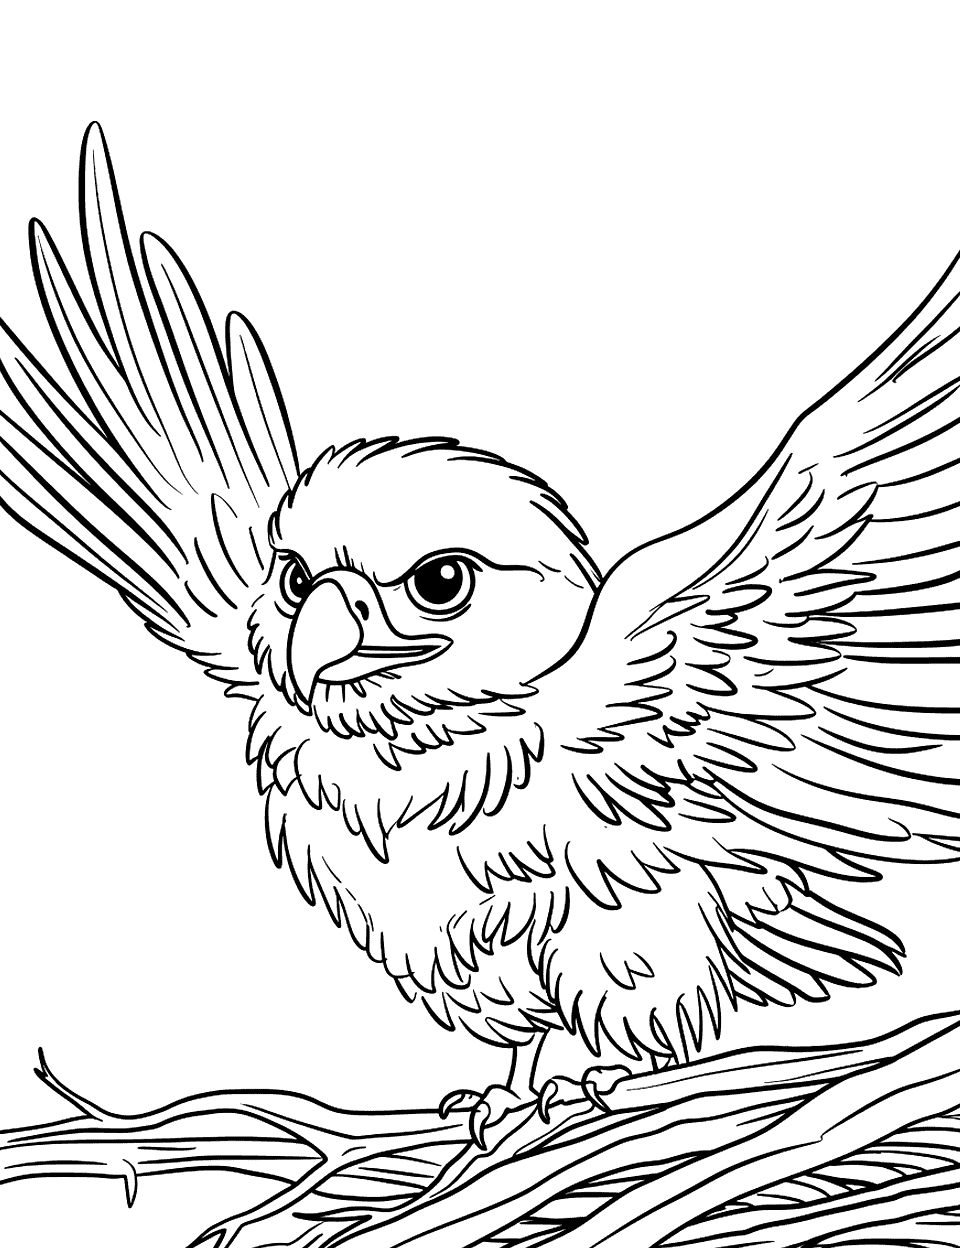 Cute Baby Eagle Learning to Fly Coloring Page - A fluffy baby eagle spreads its wings wide, attempting its first flight from the edge of a nest.